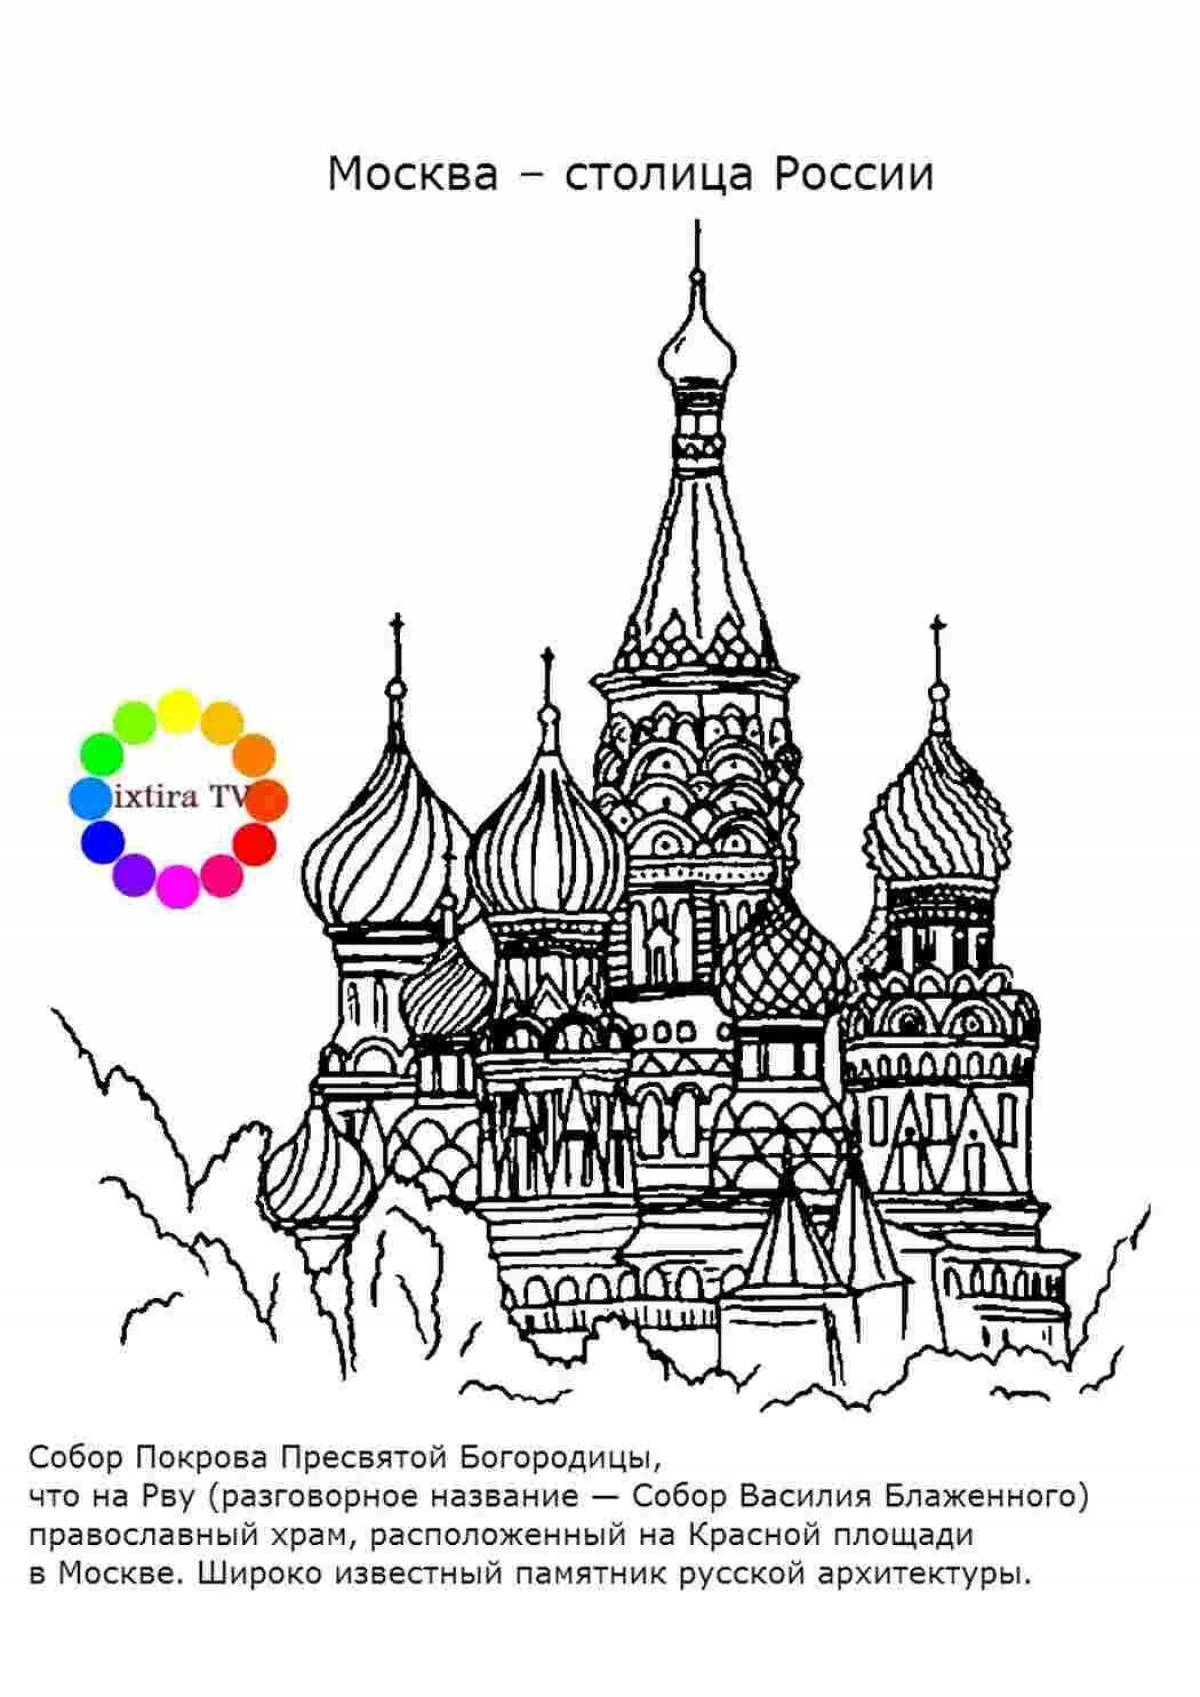 St. Basil's Cathedral #8